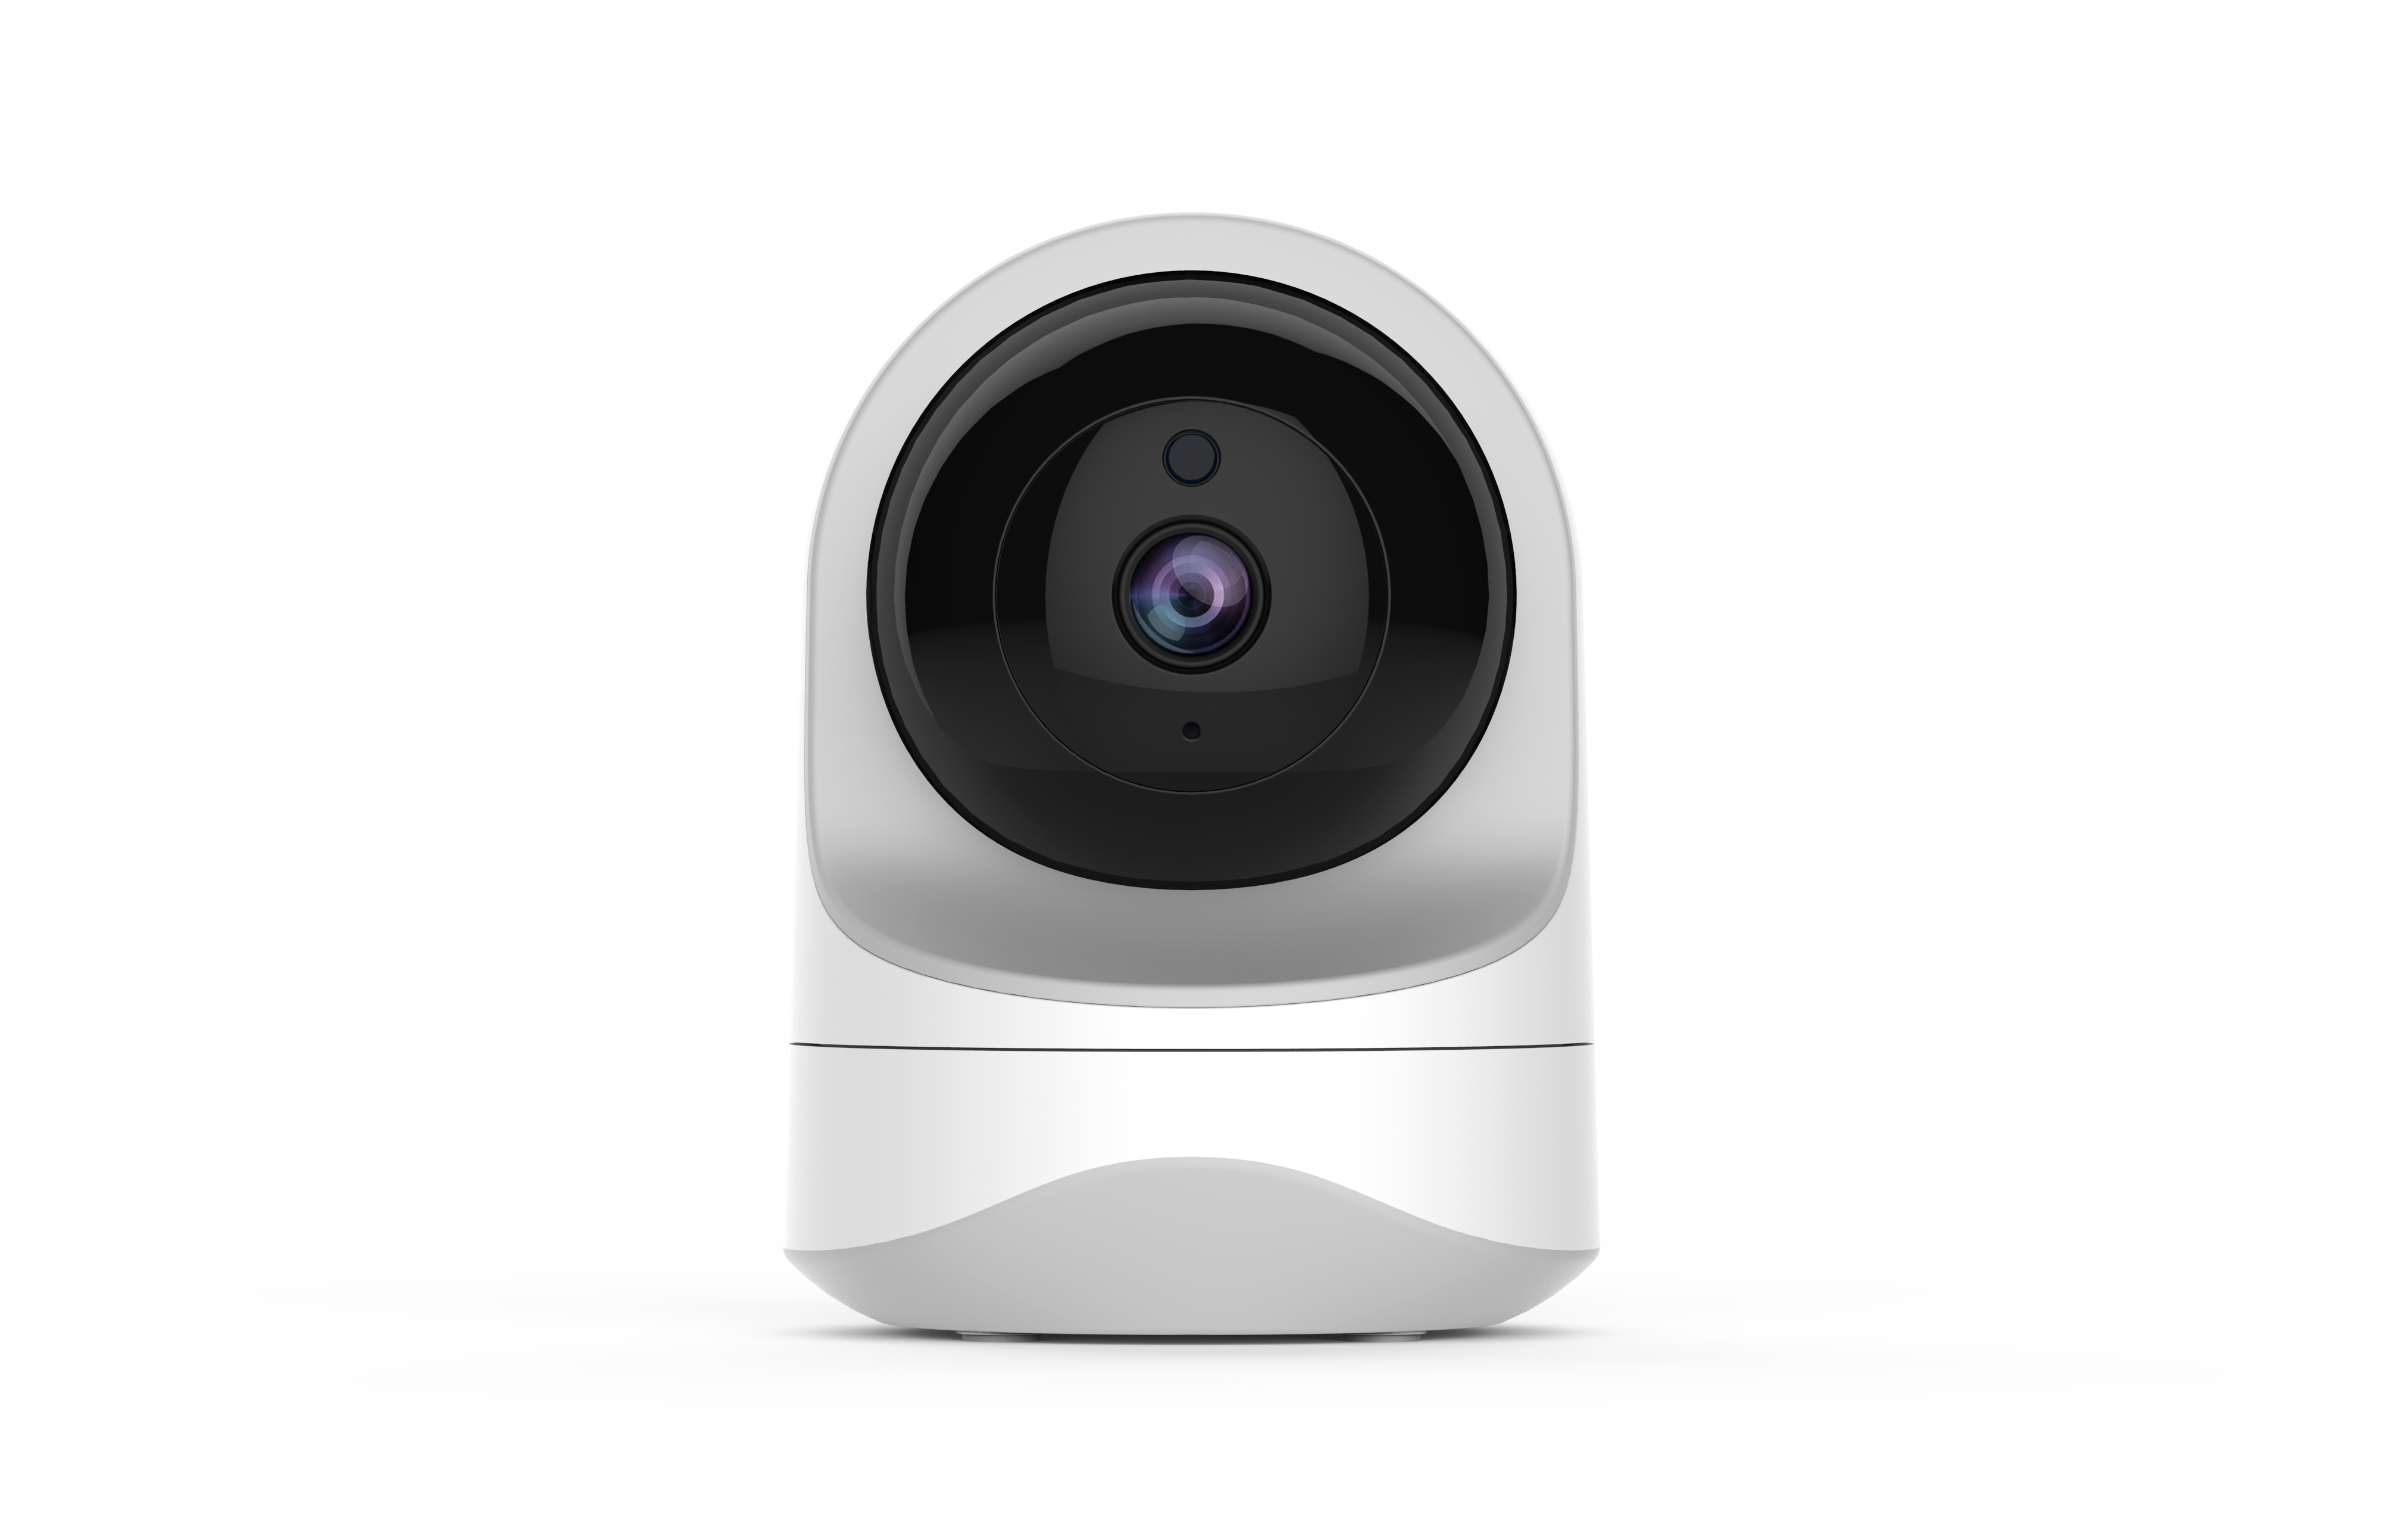 How to save video from surveillance camera to phone?